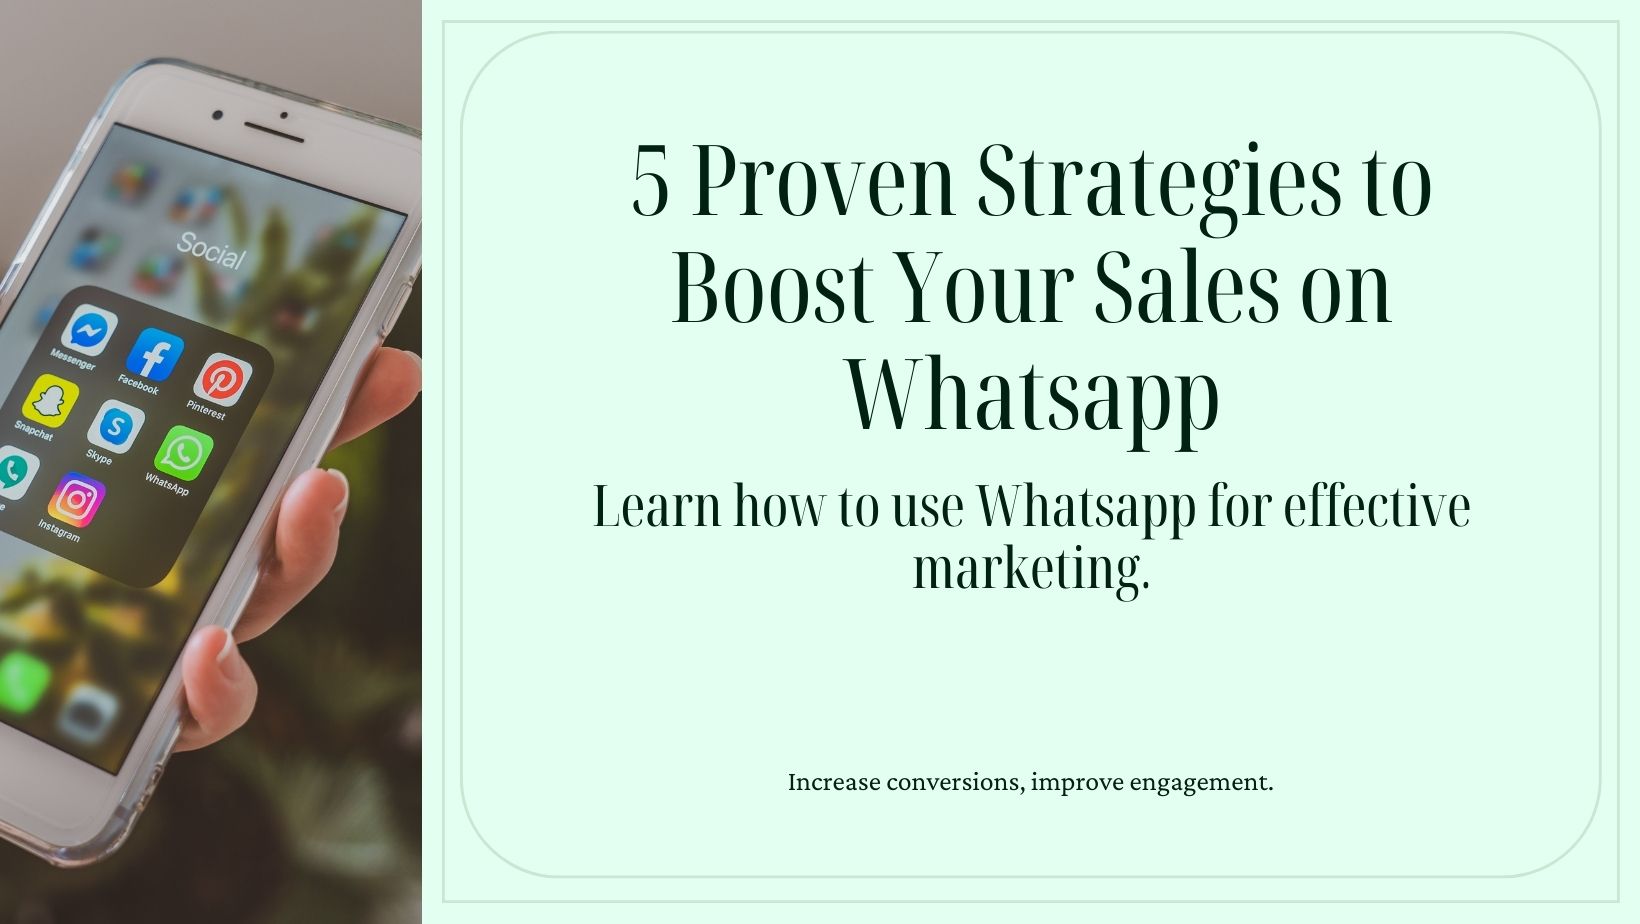 5 Proven Whatsapp Marketing Strategies To Grow Your Sales